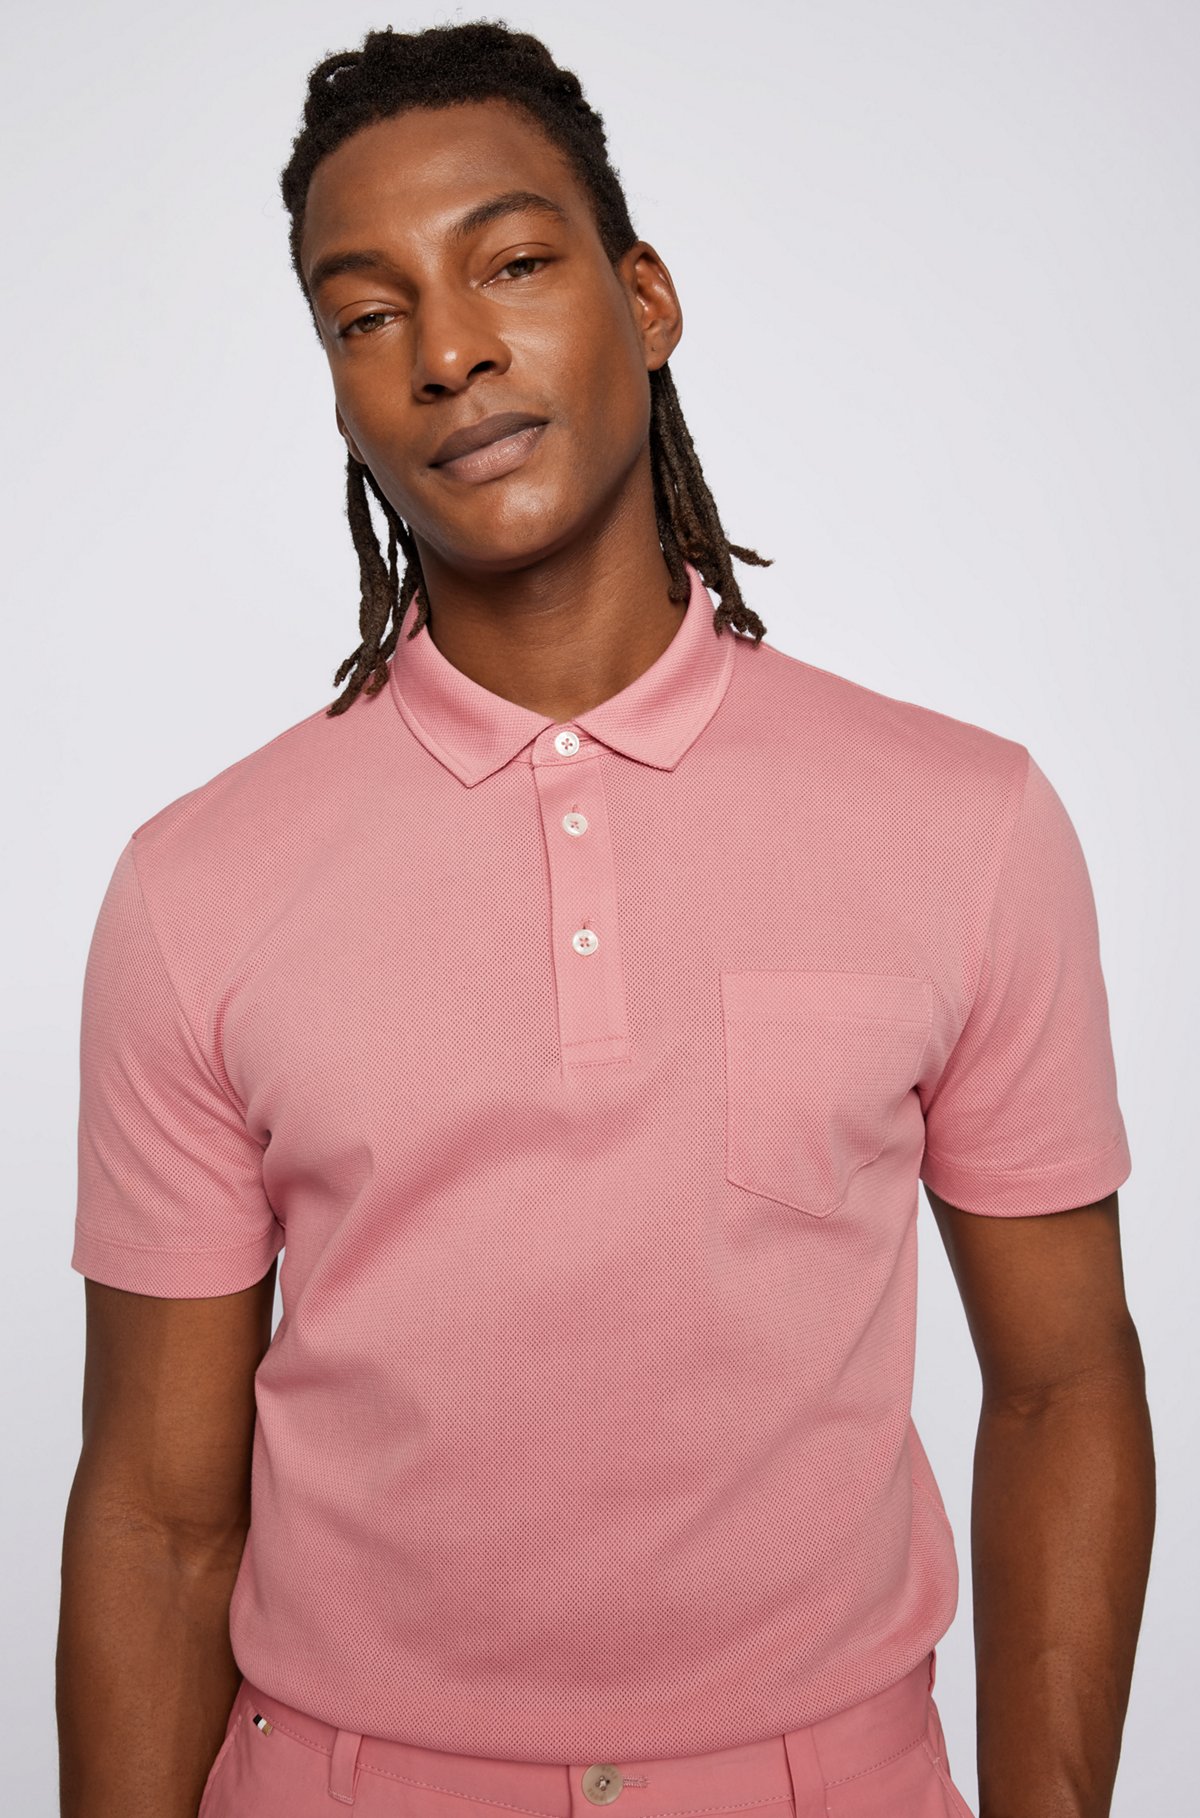 Cotton-mesh polo shirt with chest pocket, light pink